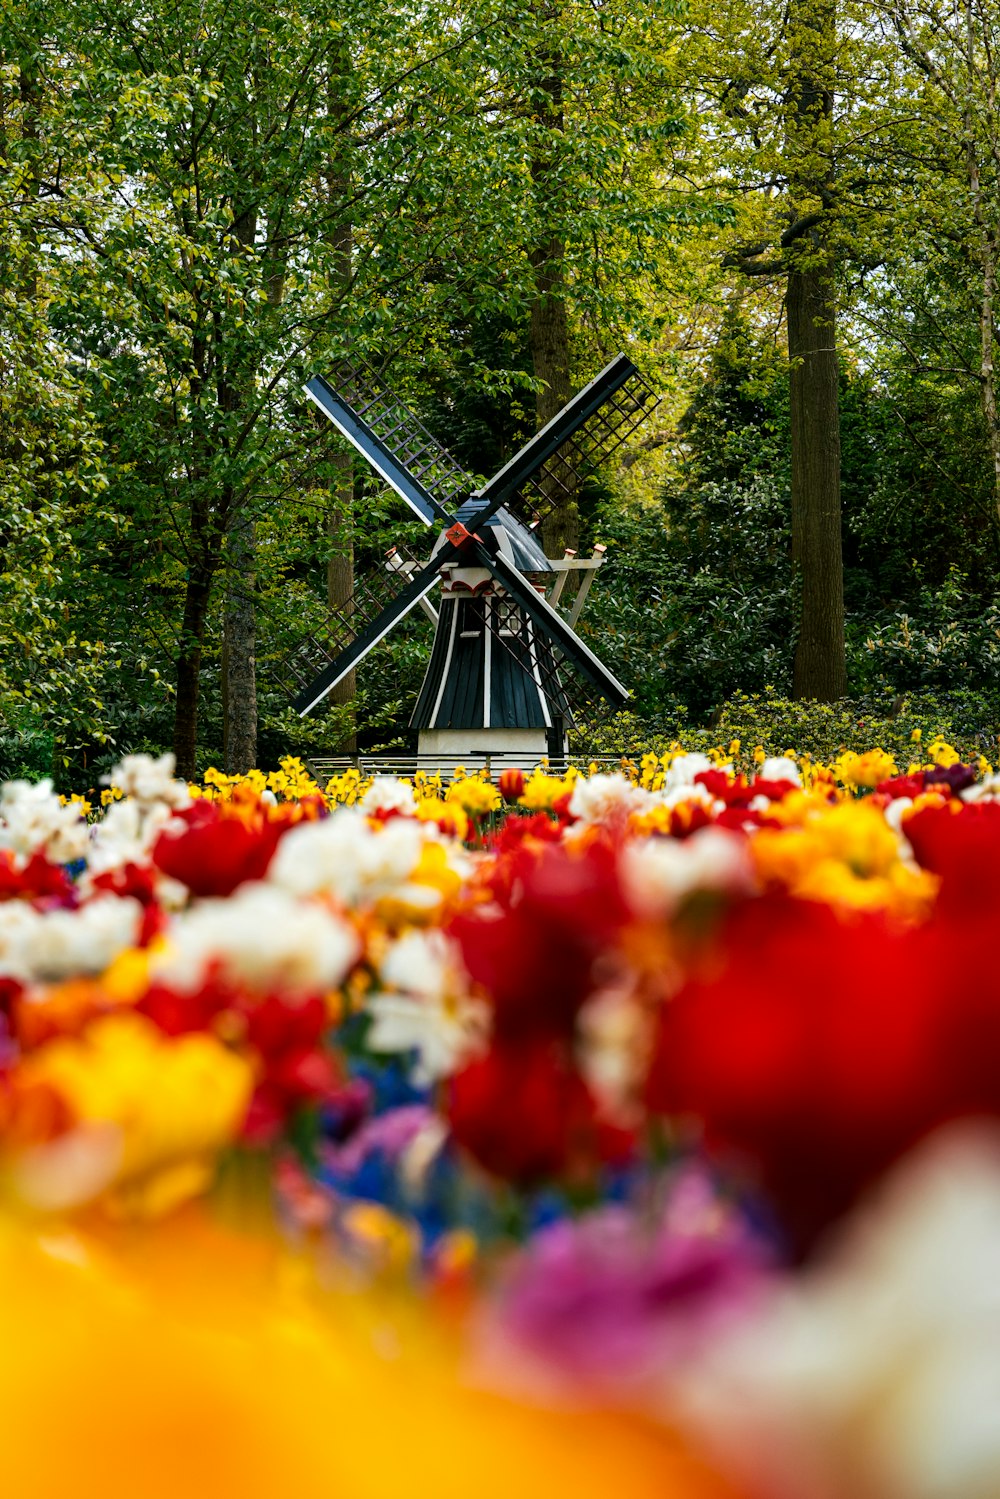 a windmill in a field of flowers with trees in the background